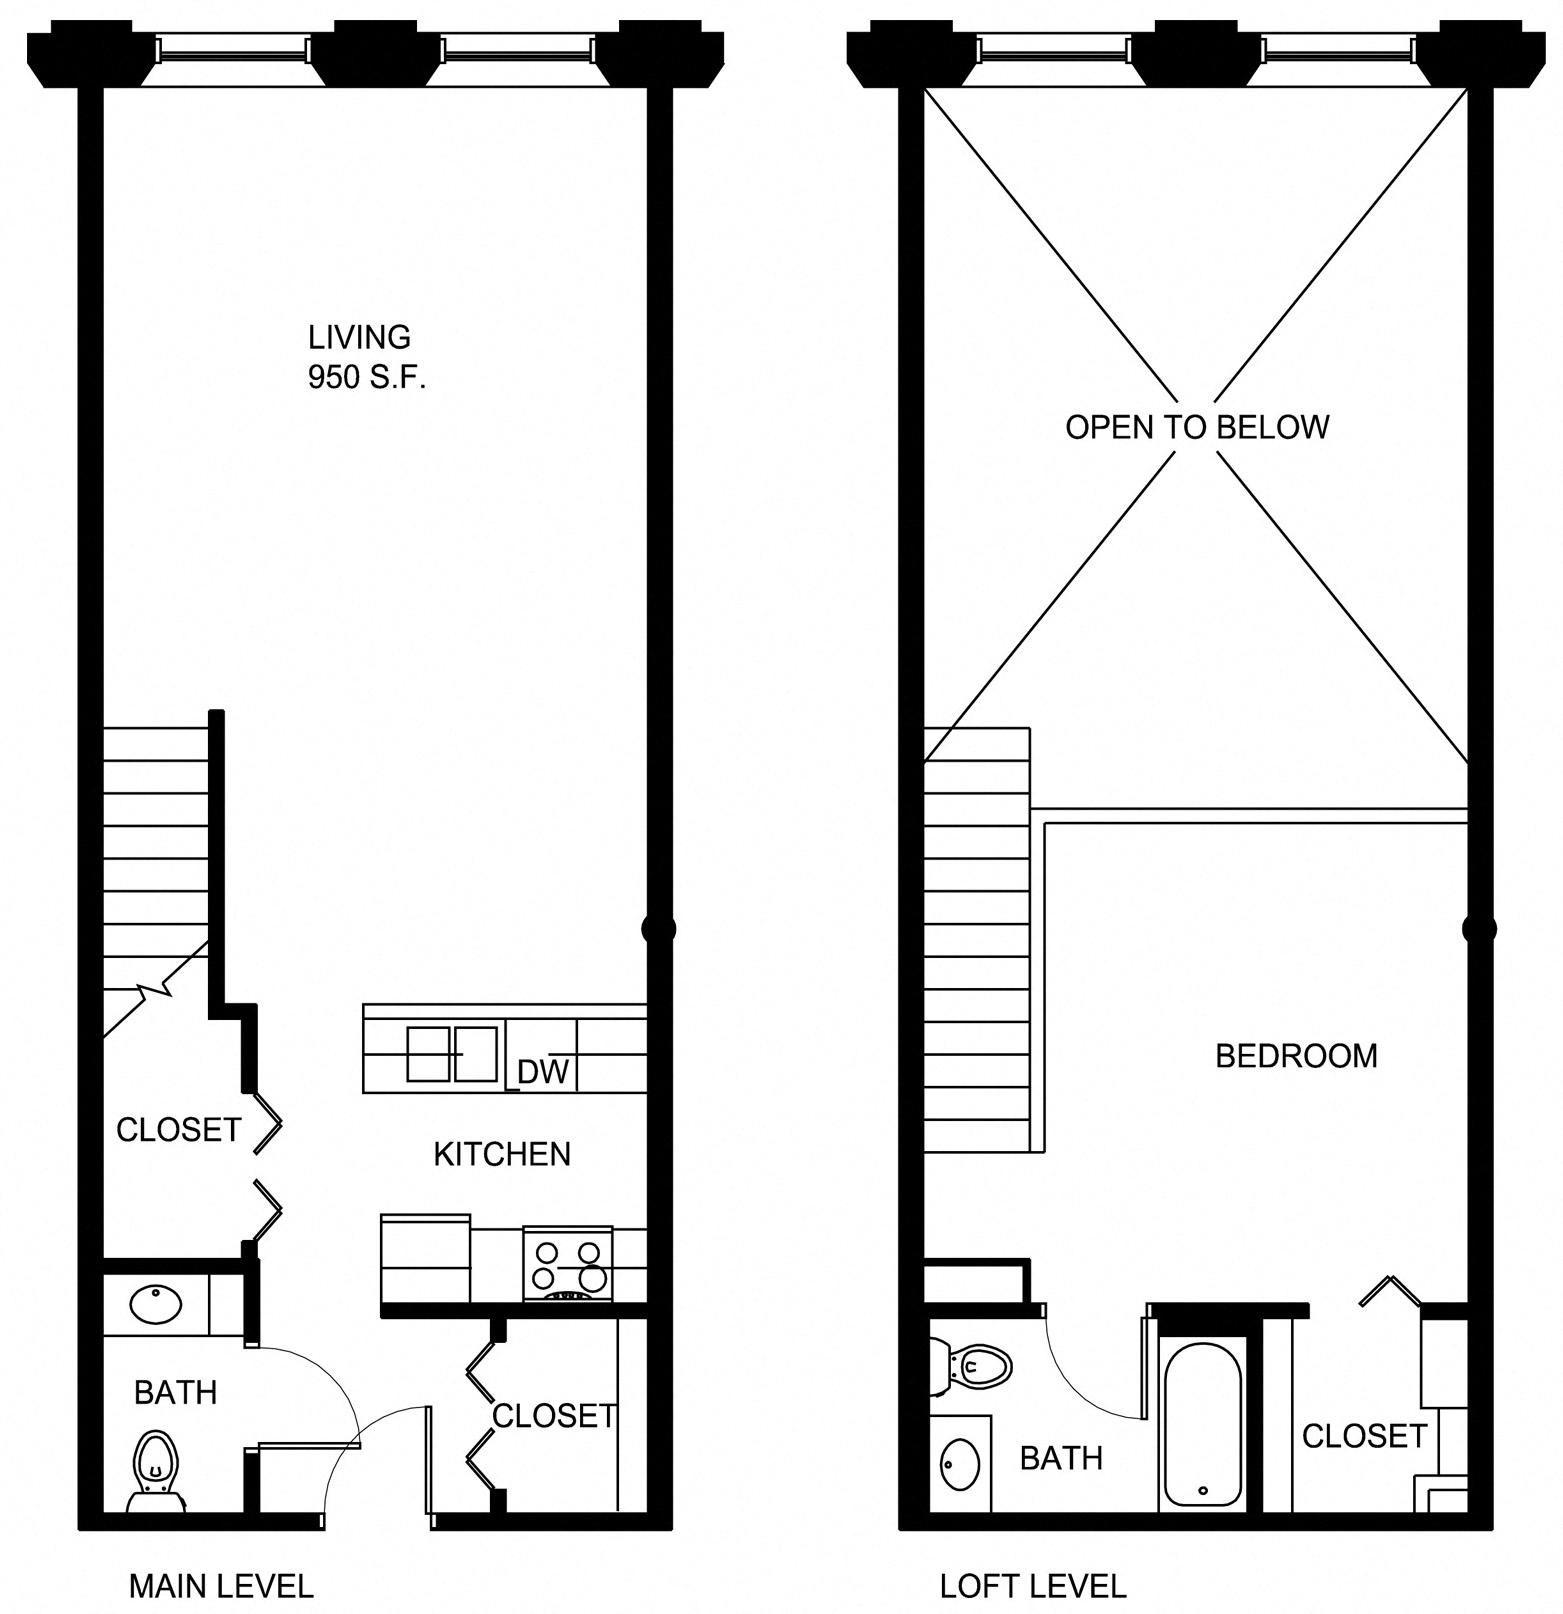 Floorplan for Apartment #P164, 1 bedroom unit at Halstead Providence